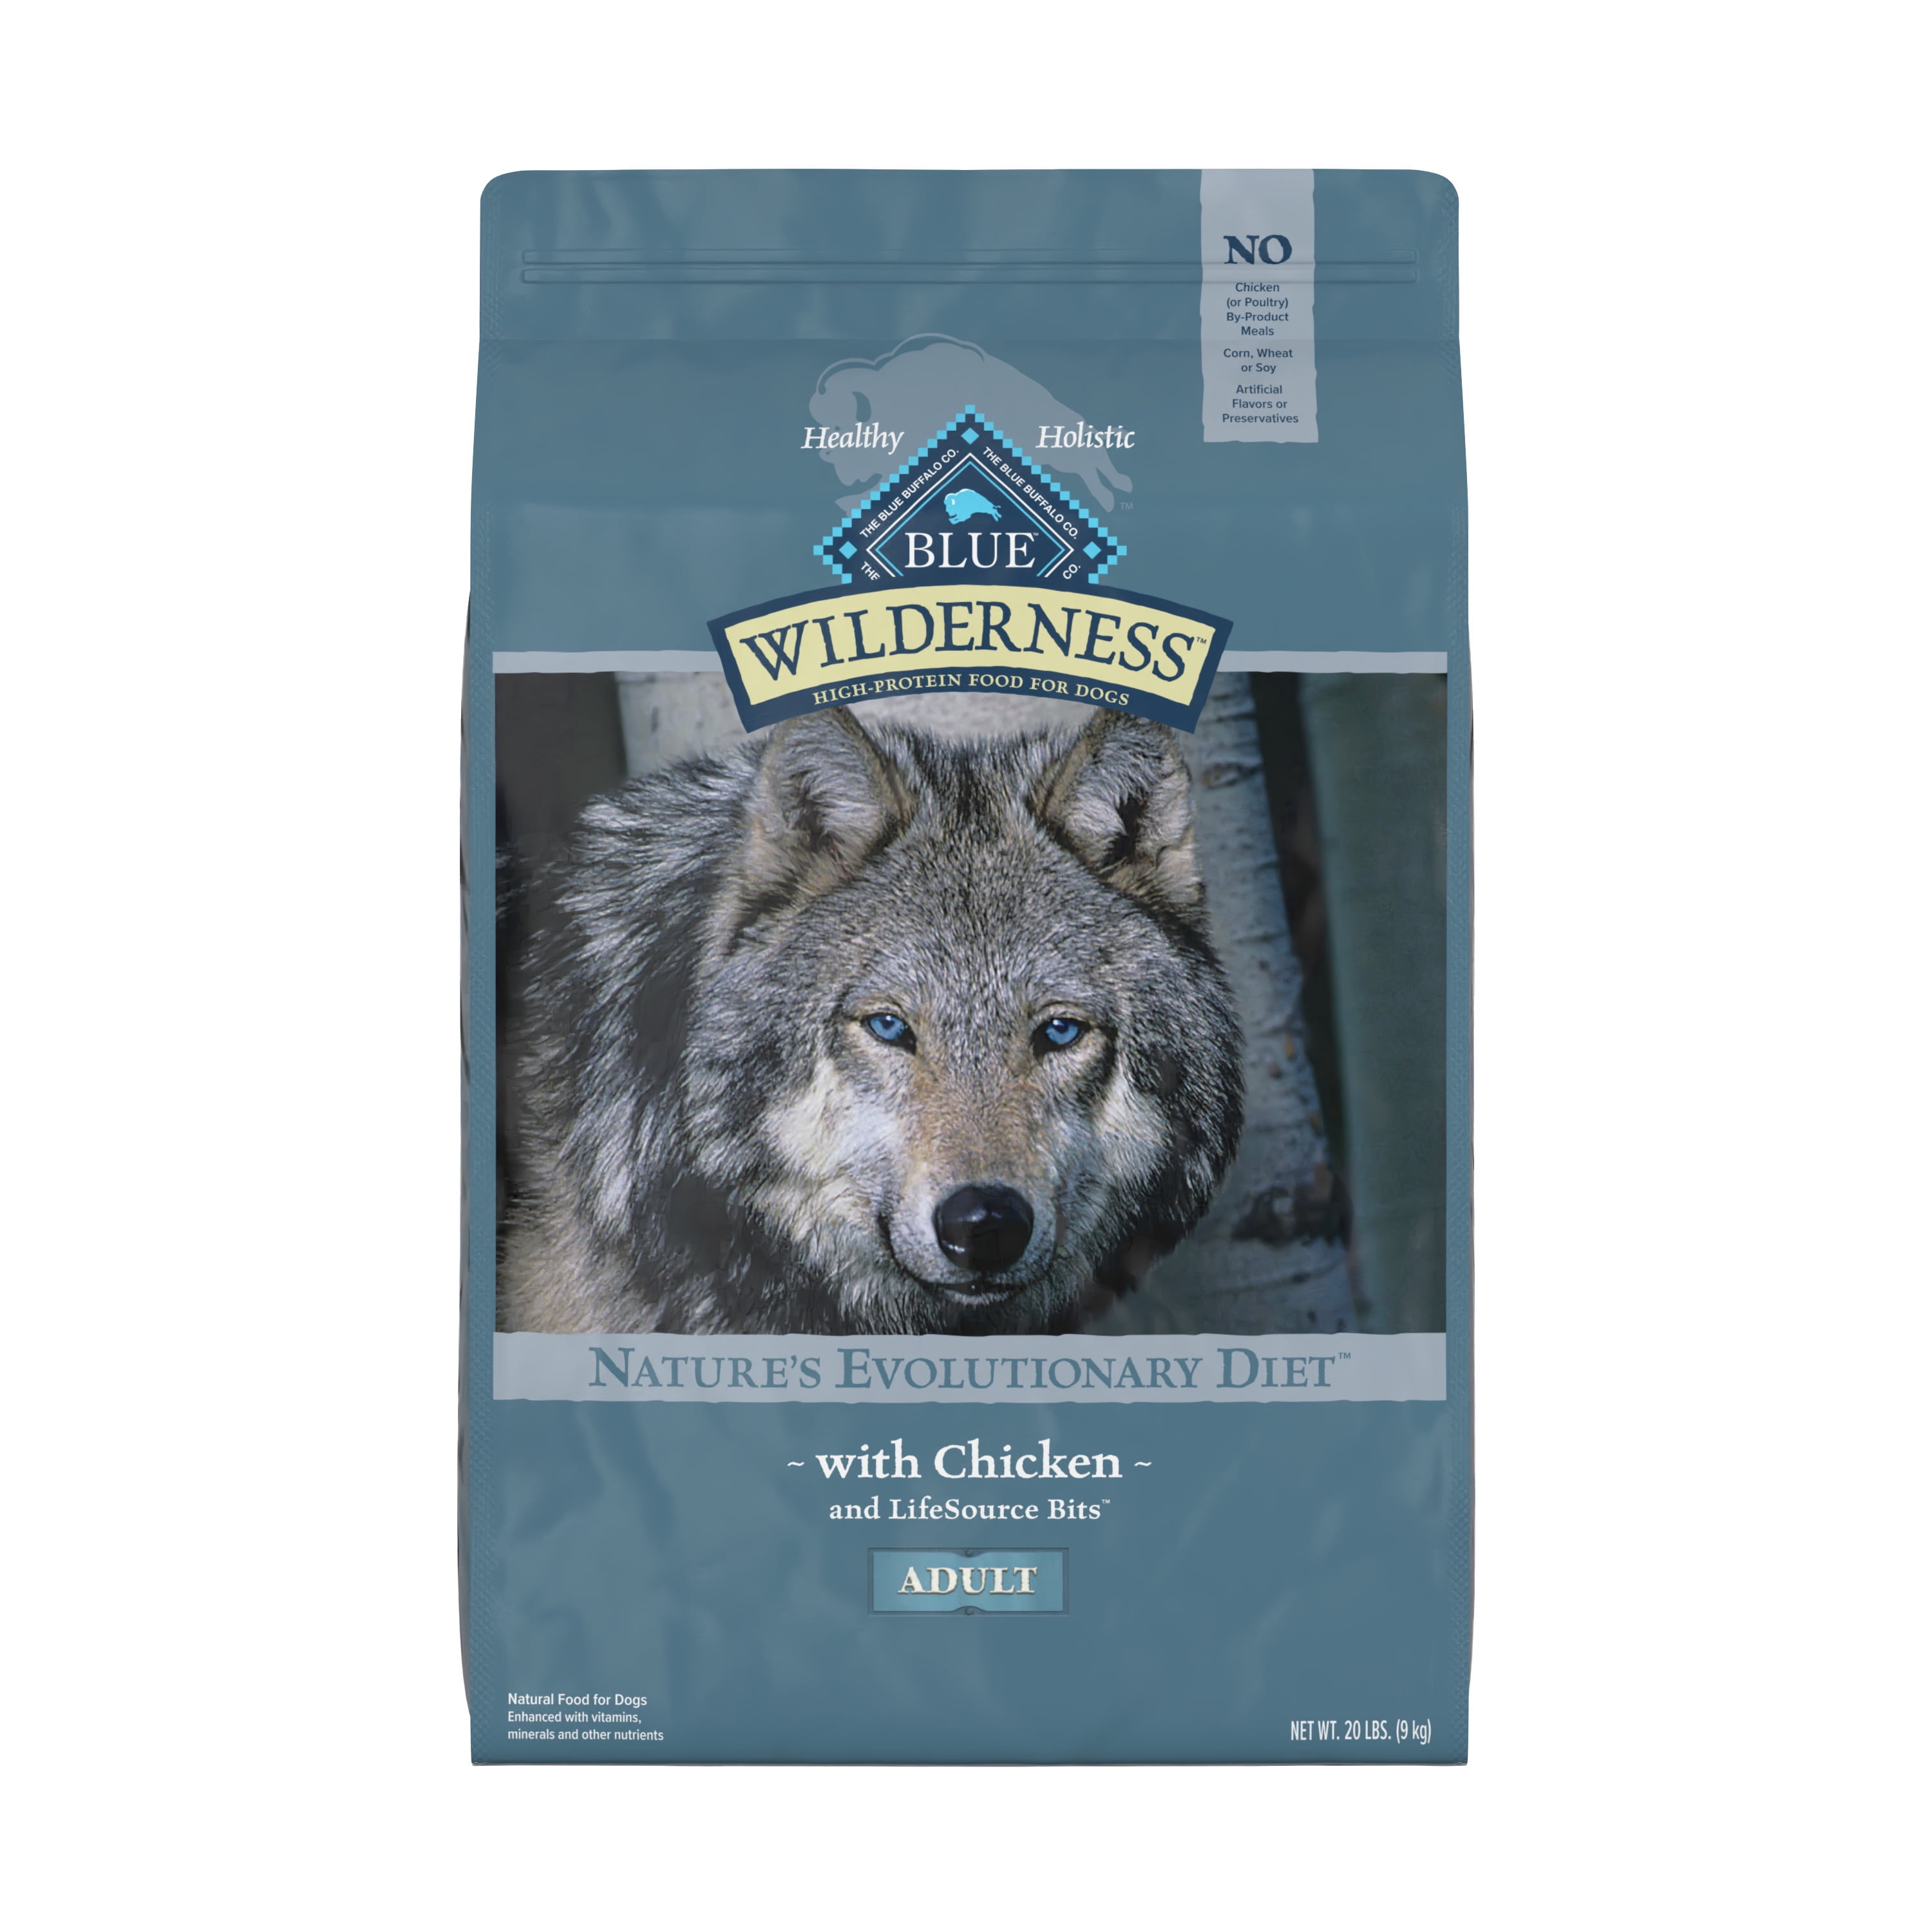 Blue Buffalo Wilderness High Protein Chicken Dry Dog Food for Adult Dogs, Grain-Free, 20 lb. Bag